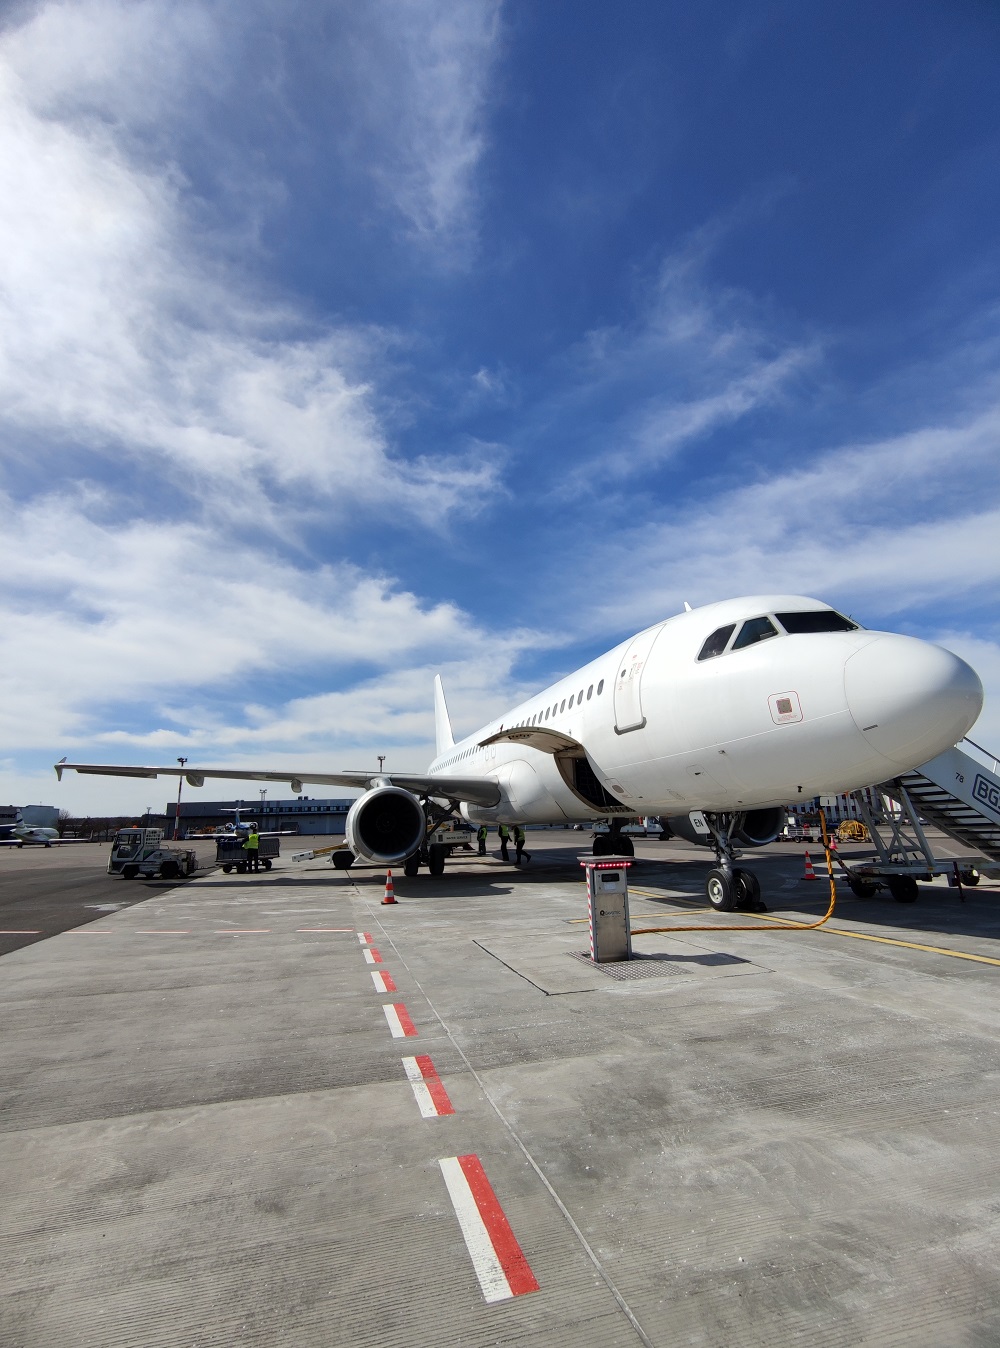 Avion Express increases fleet size by 212%